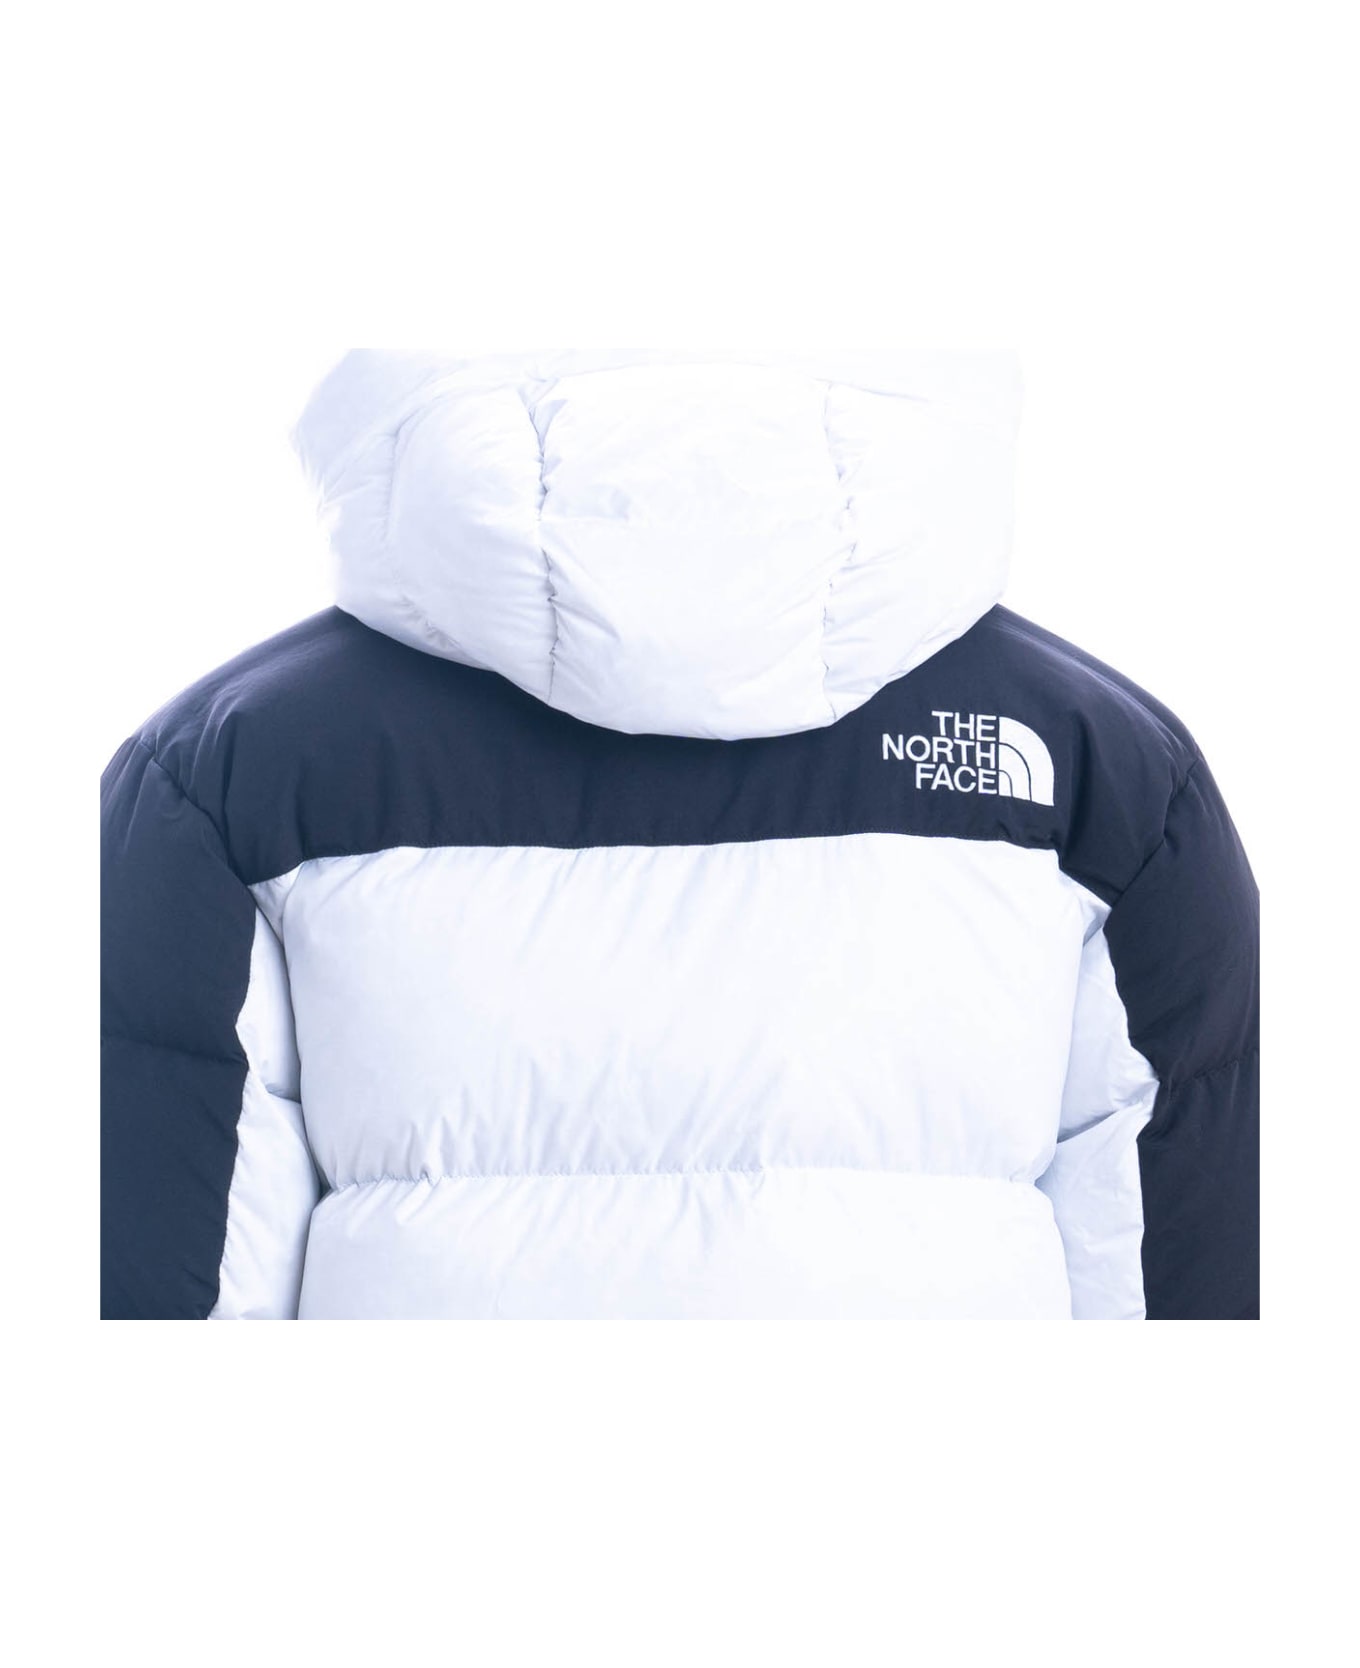 The North Face "himalayan" Down Jacket - WHITE